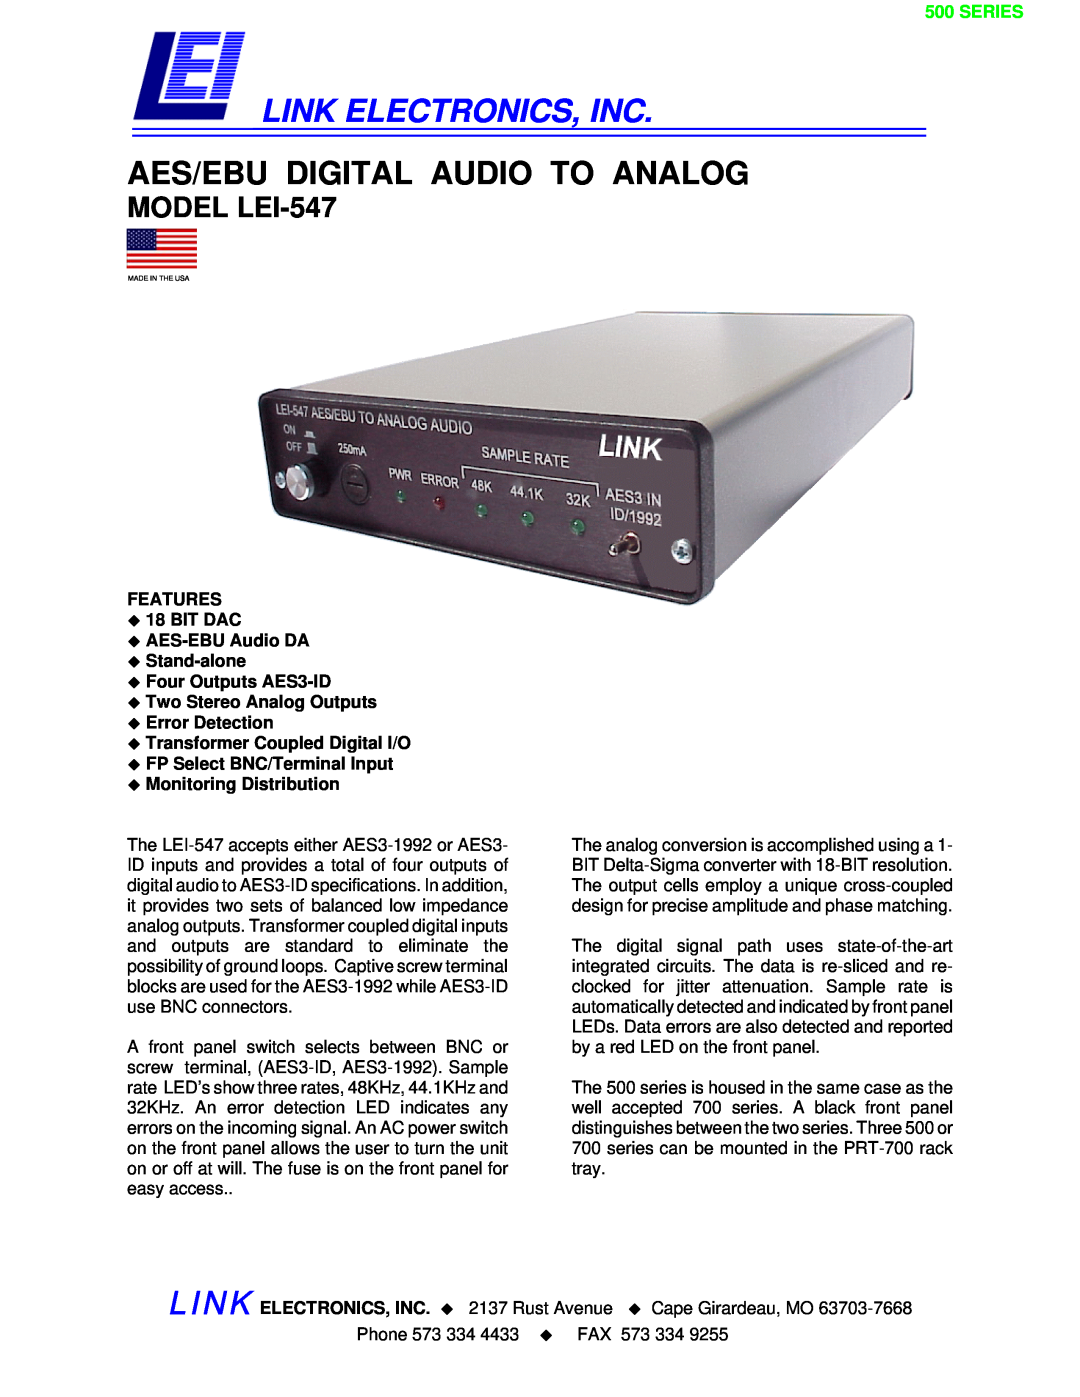 Link electronic specifications Link Electronics, Inc, Aes/Ebu Digital Audio To Analog, MODEL LEI-547, Series 